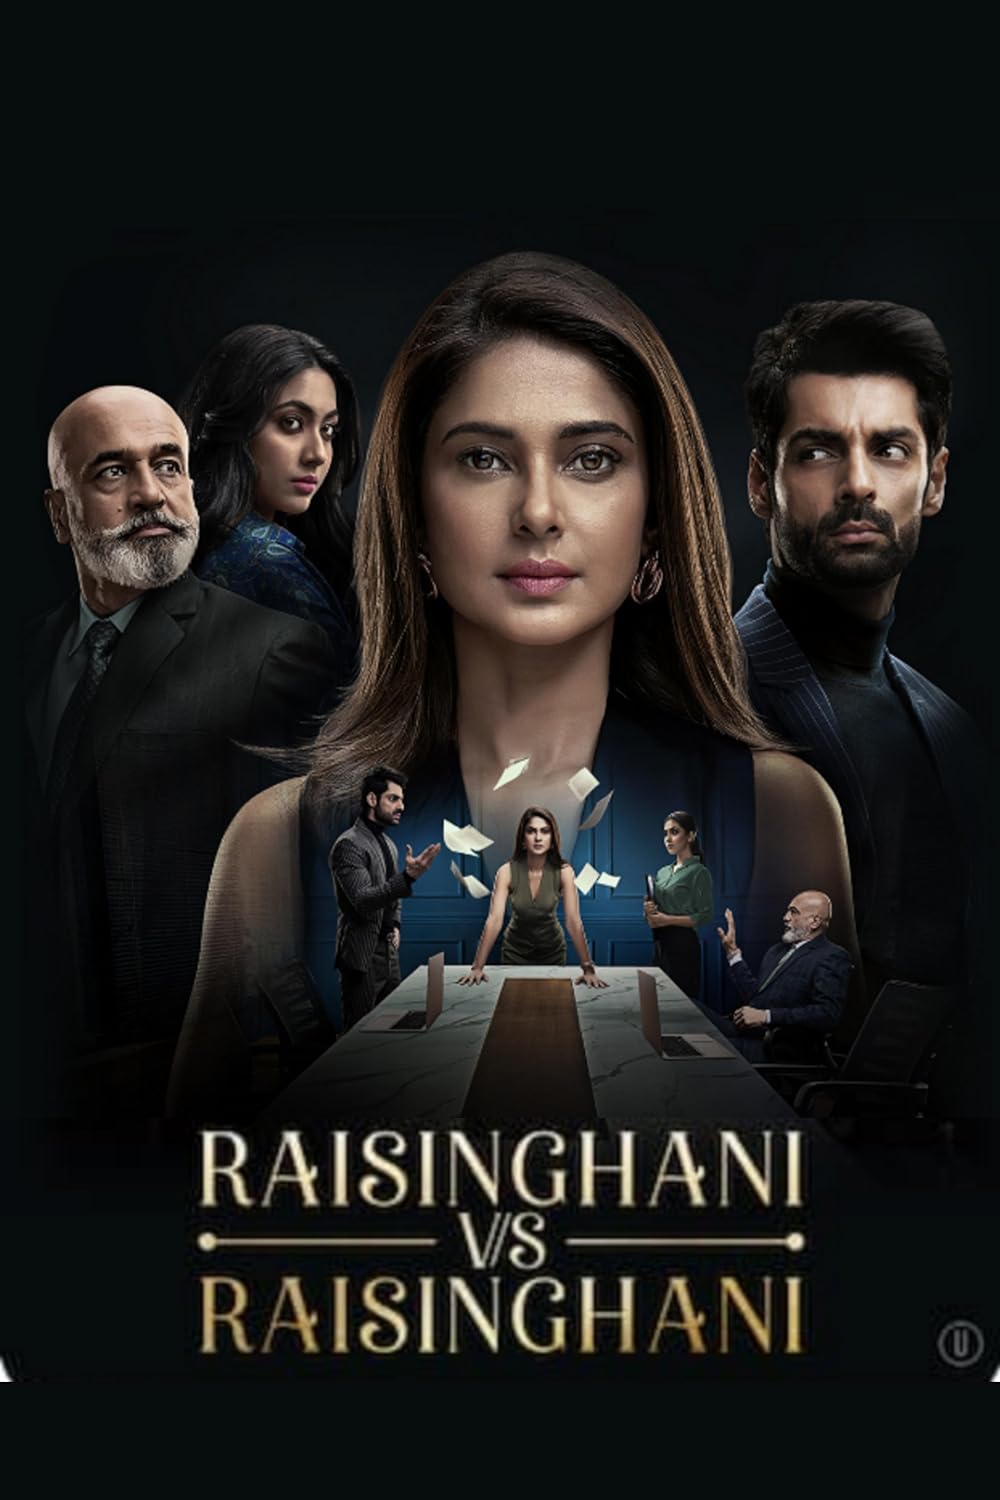 Raisinghani vs Raisinghani (February 12) - Streaming on SonyLIVRaisinghani vs Raisinghani presents a compelling narrative set within the high-stakes environment of a prestigious law firm, focusing on the lives of young legal professionals Anushka and Virat, portrayed by Jennifer Winget and Karan Wahi, respectively. As Anushka strives to establish herself in her father’s law firm, she confronts challenging cases and the barriers of a patriarchal society.